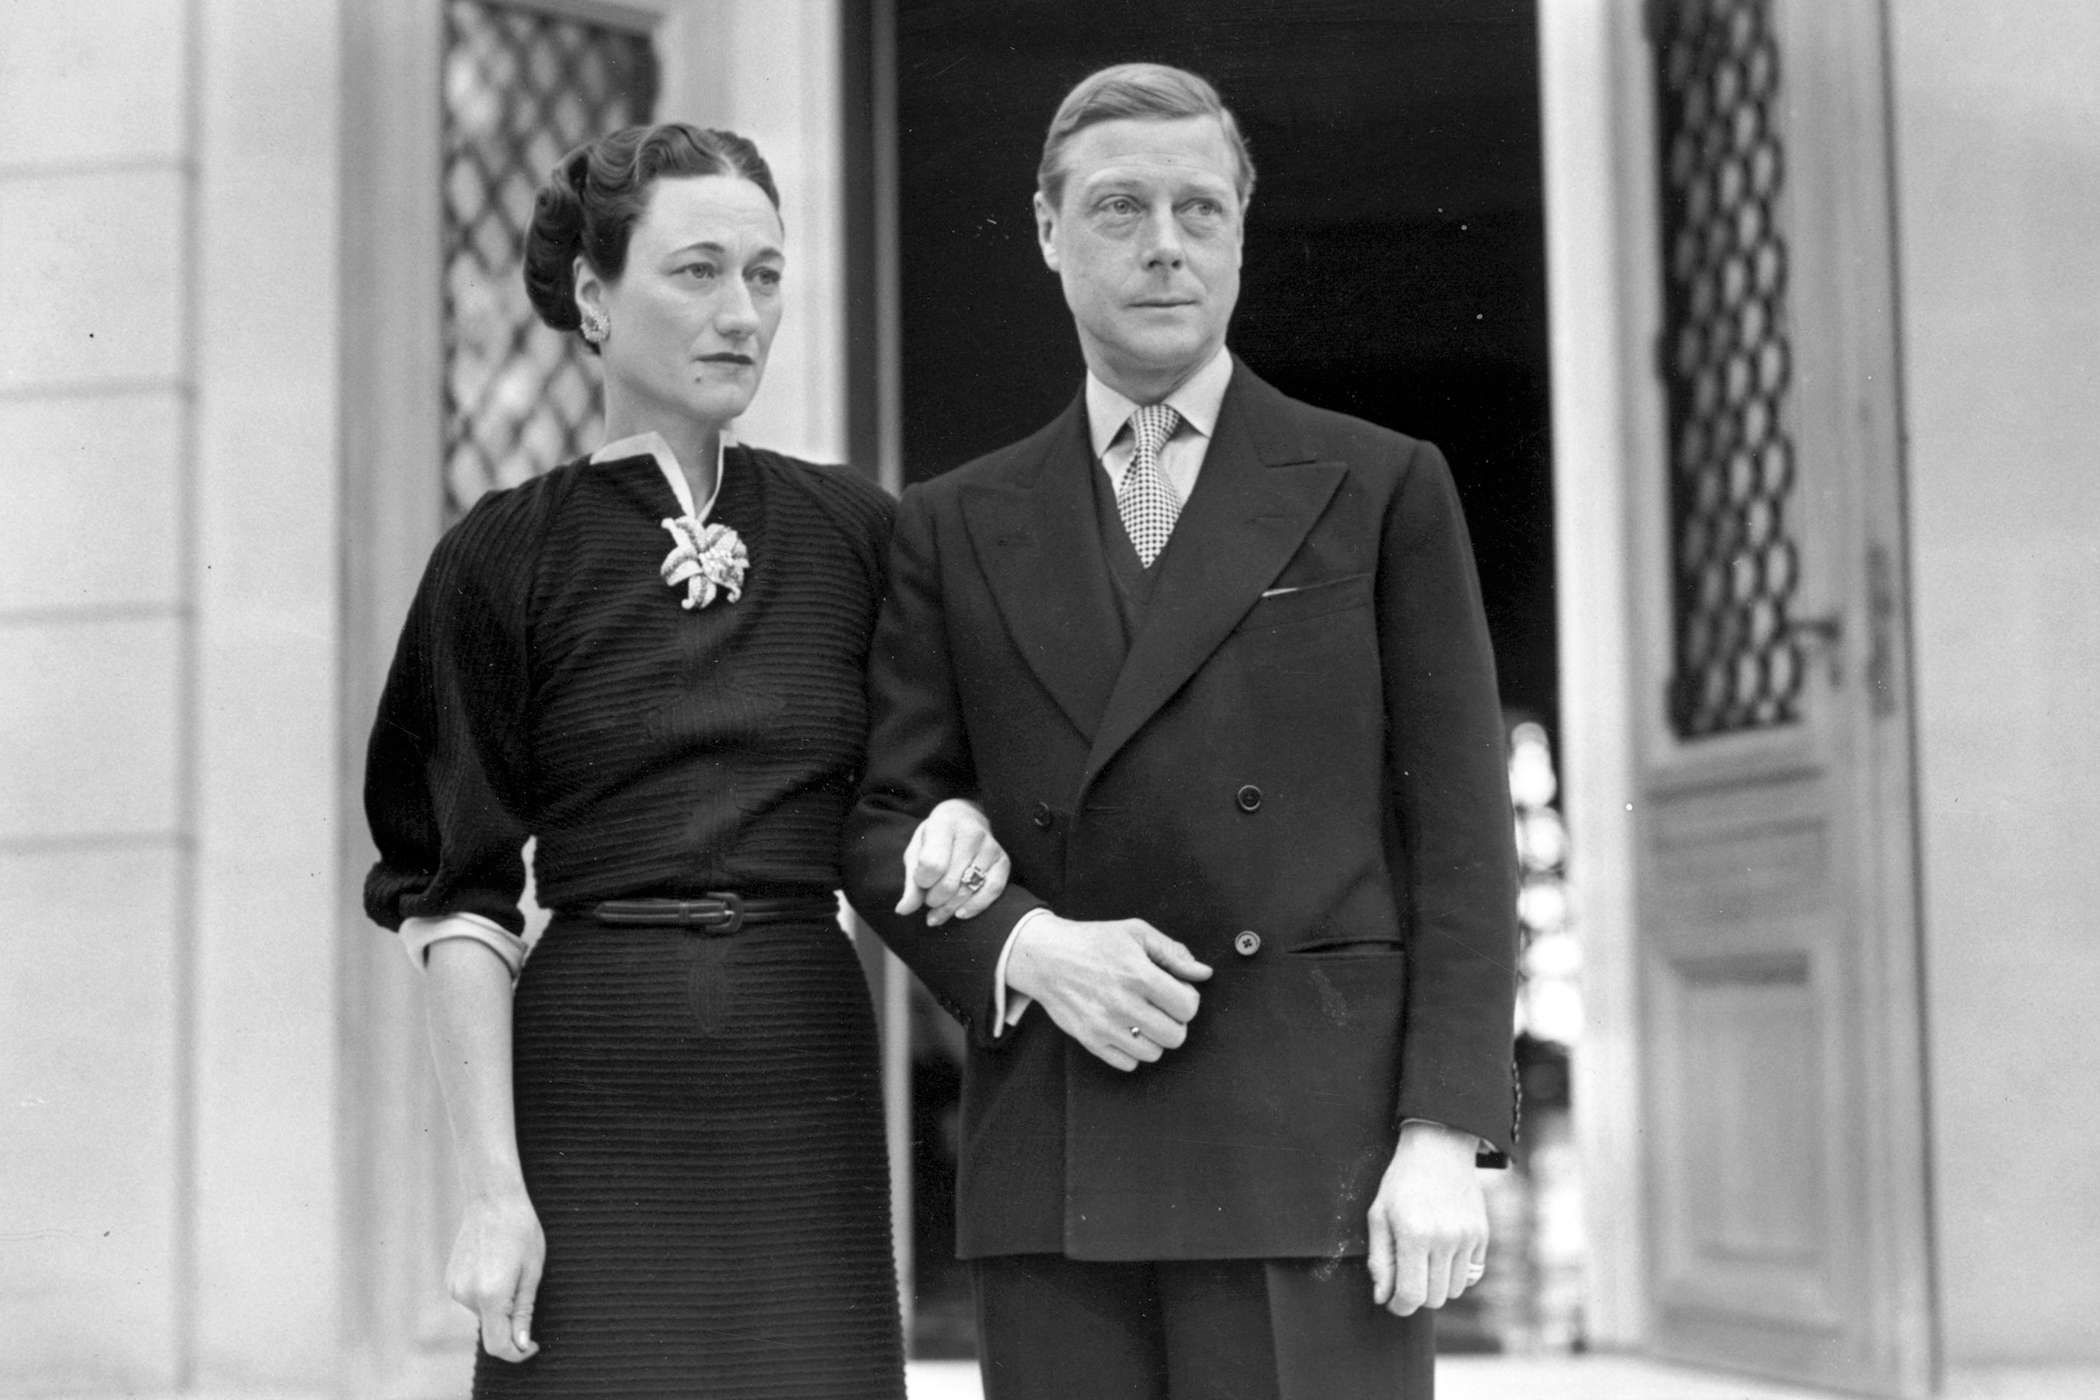 The Duke and Duchess of Windsor, (formerly Edward VIII and Wallis Simpson) at their home, the Villa La Croe in Cap D'Antibes, Cannes in France, where they spent the New Year, January 2, 1939.